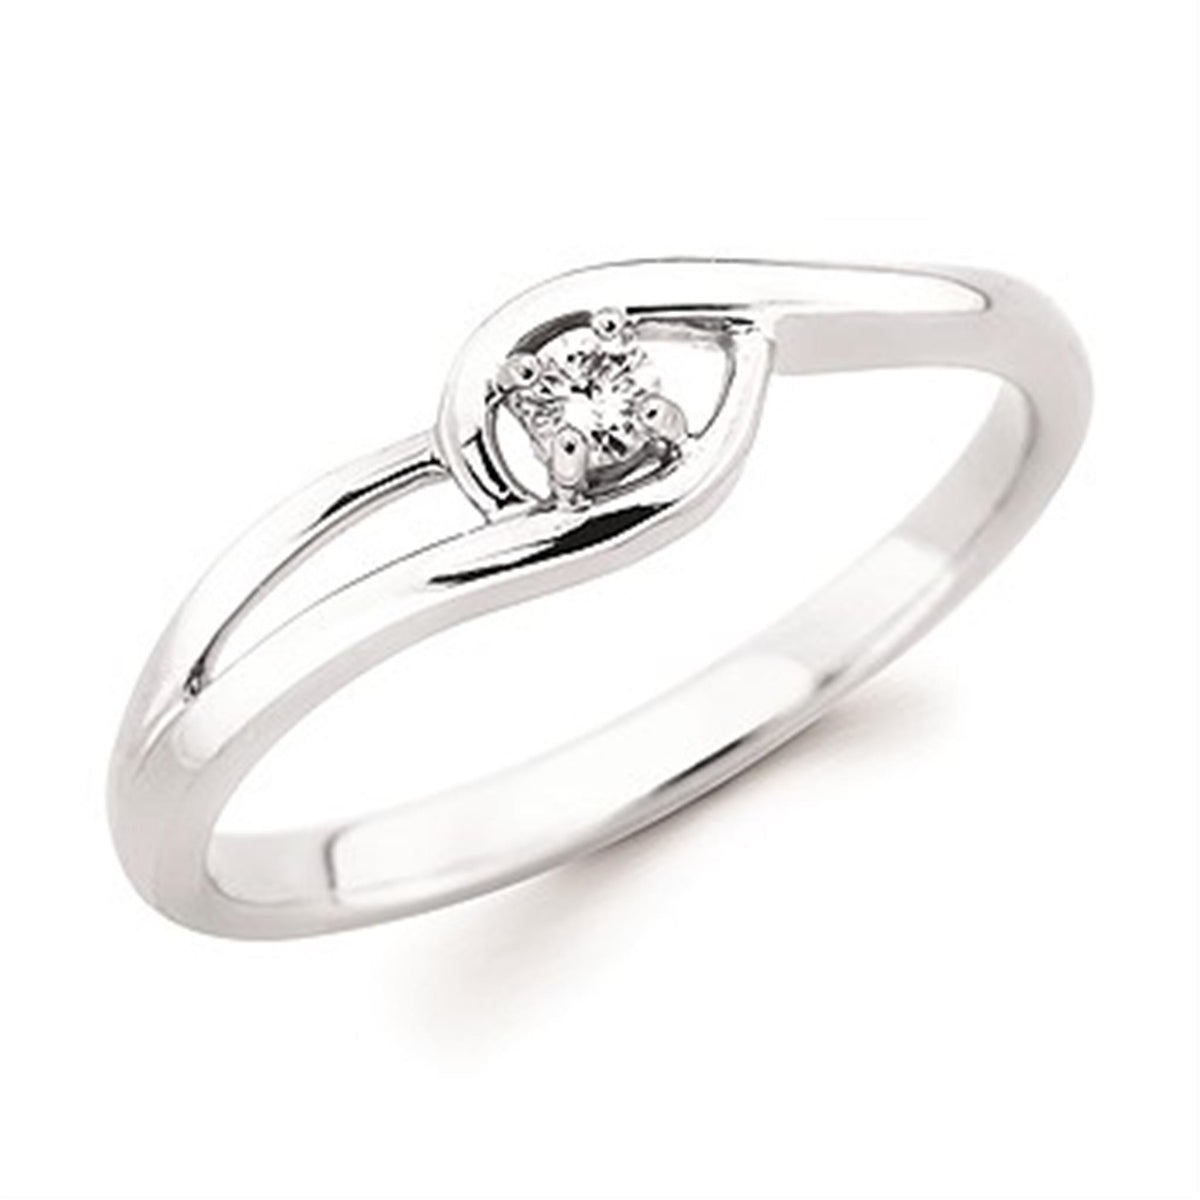 Sterling Silver Prong Set Fashion Ring